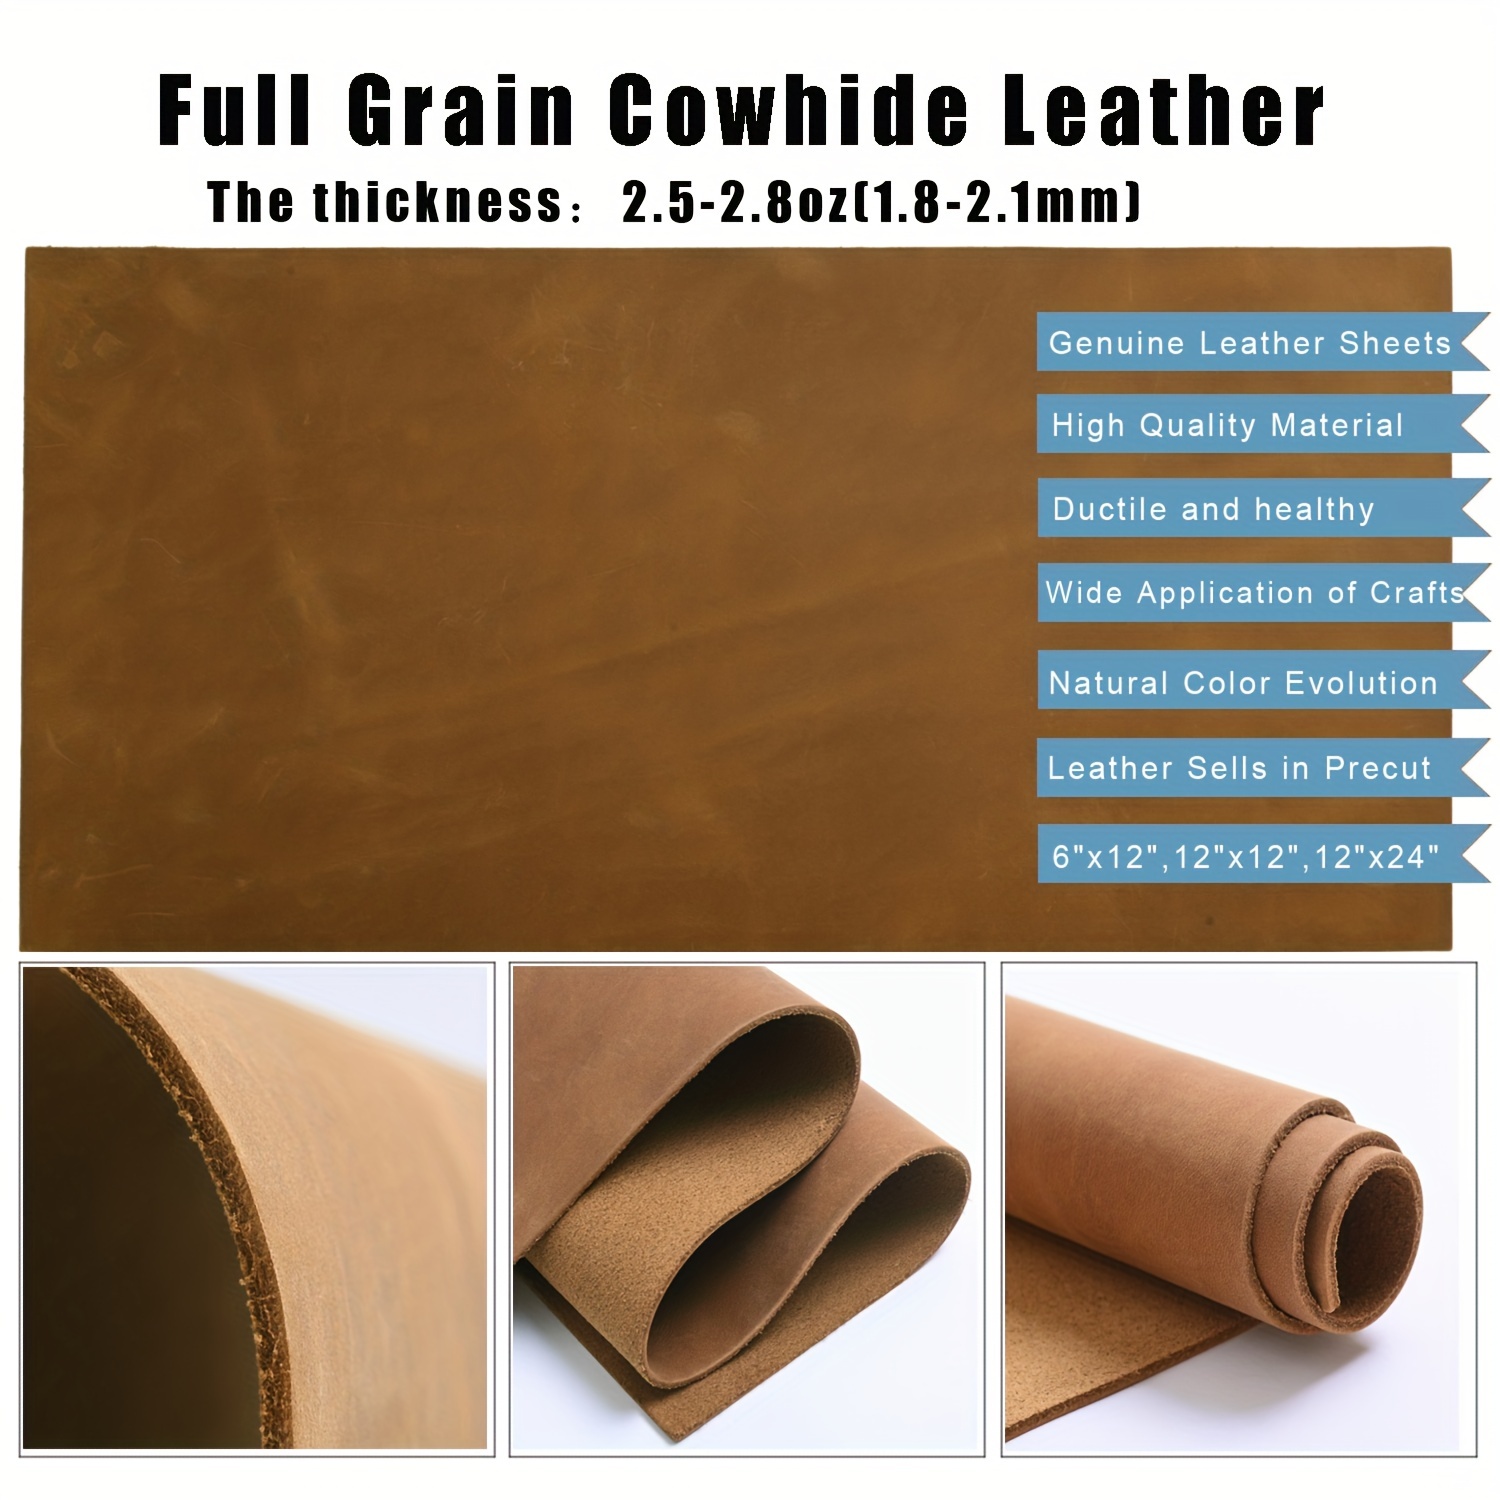 Latte Brown Leather Sheets // Cowhide Leather // Genuine Leather Piece //  Flexible Leather // Leather Hide // Light Brown Tan Leather Sheet 